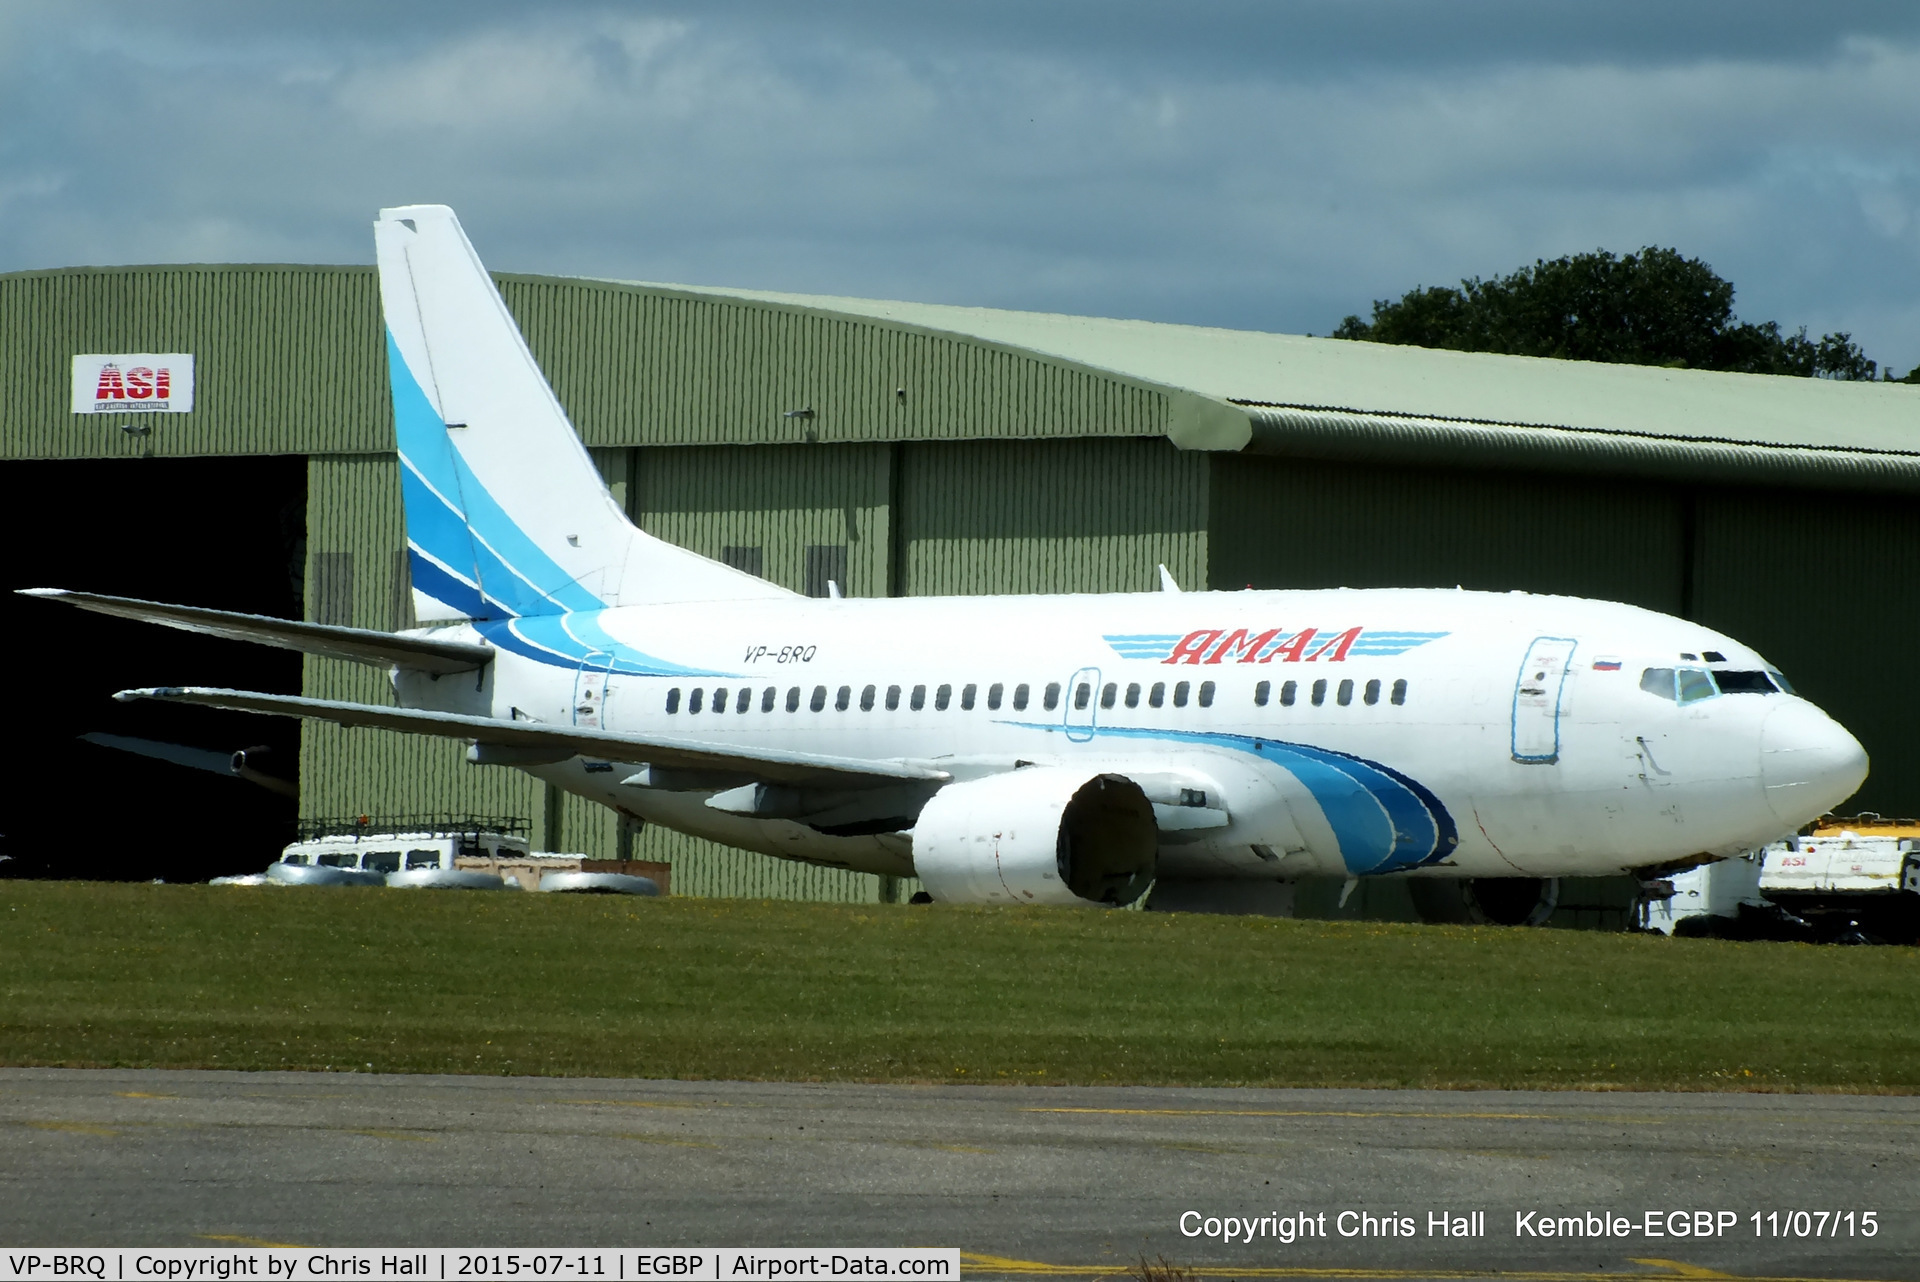 VP-BRQ, 1991 Boeing 737-528 C/N 25230, ex Yamal Airlines, being partedout by ASI at Kemble